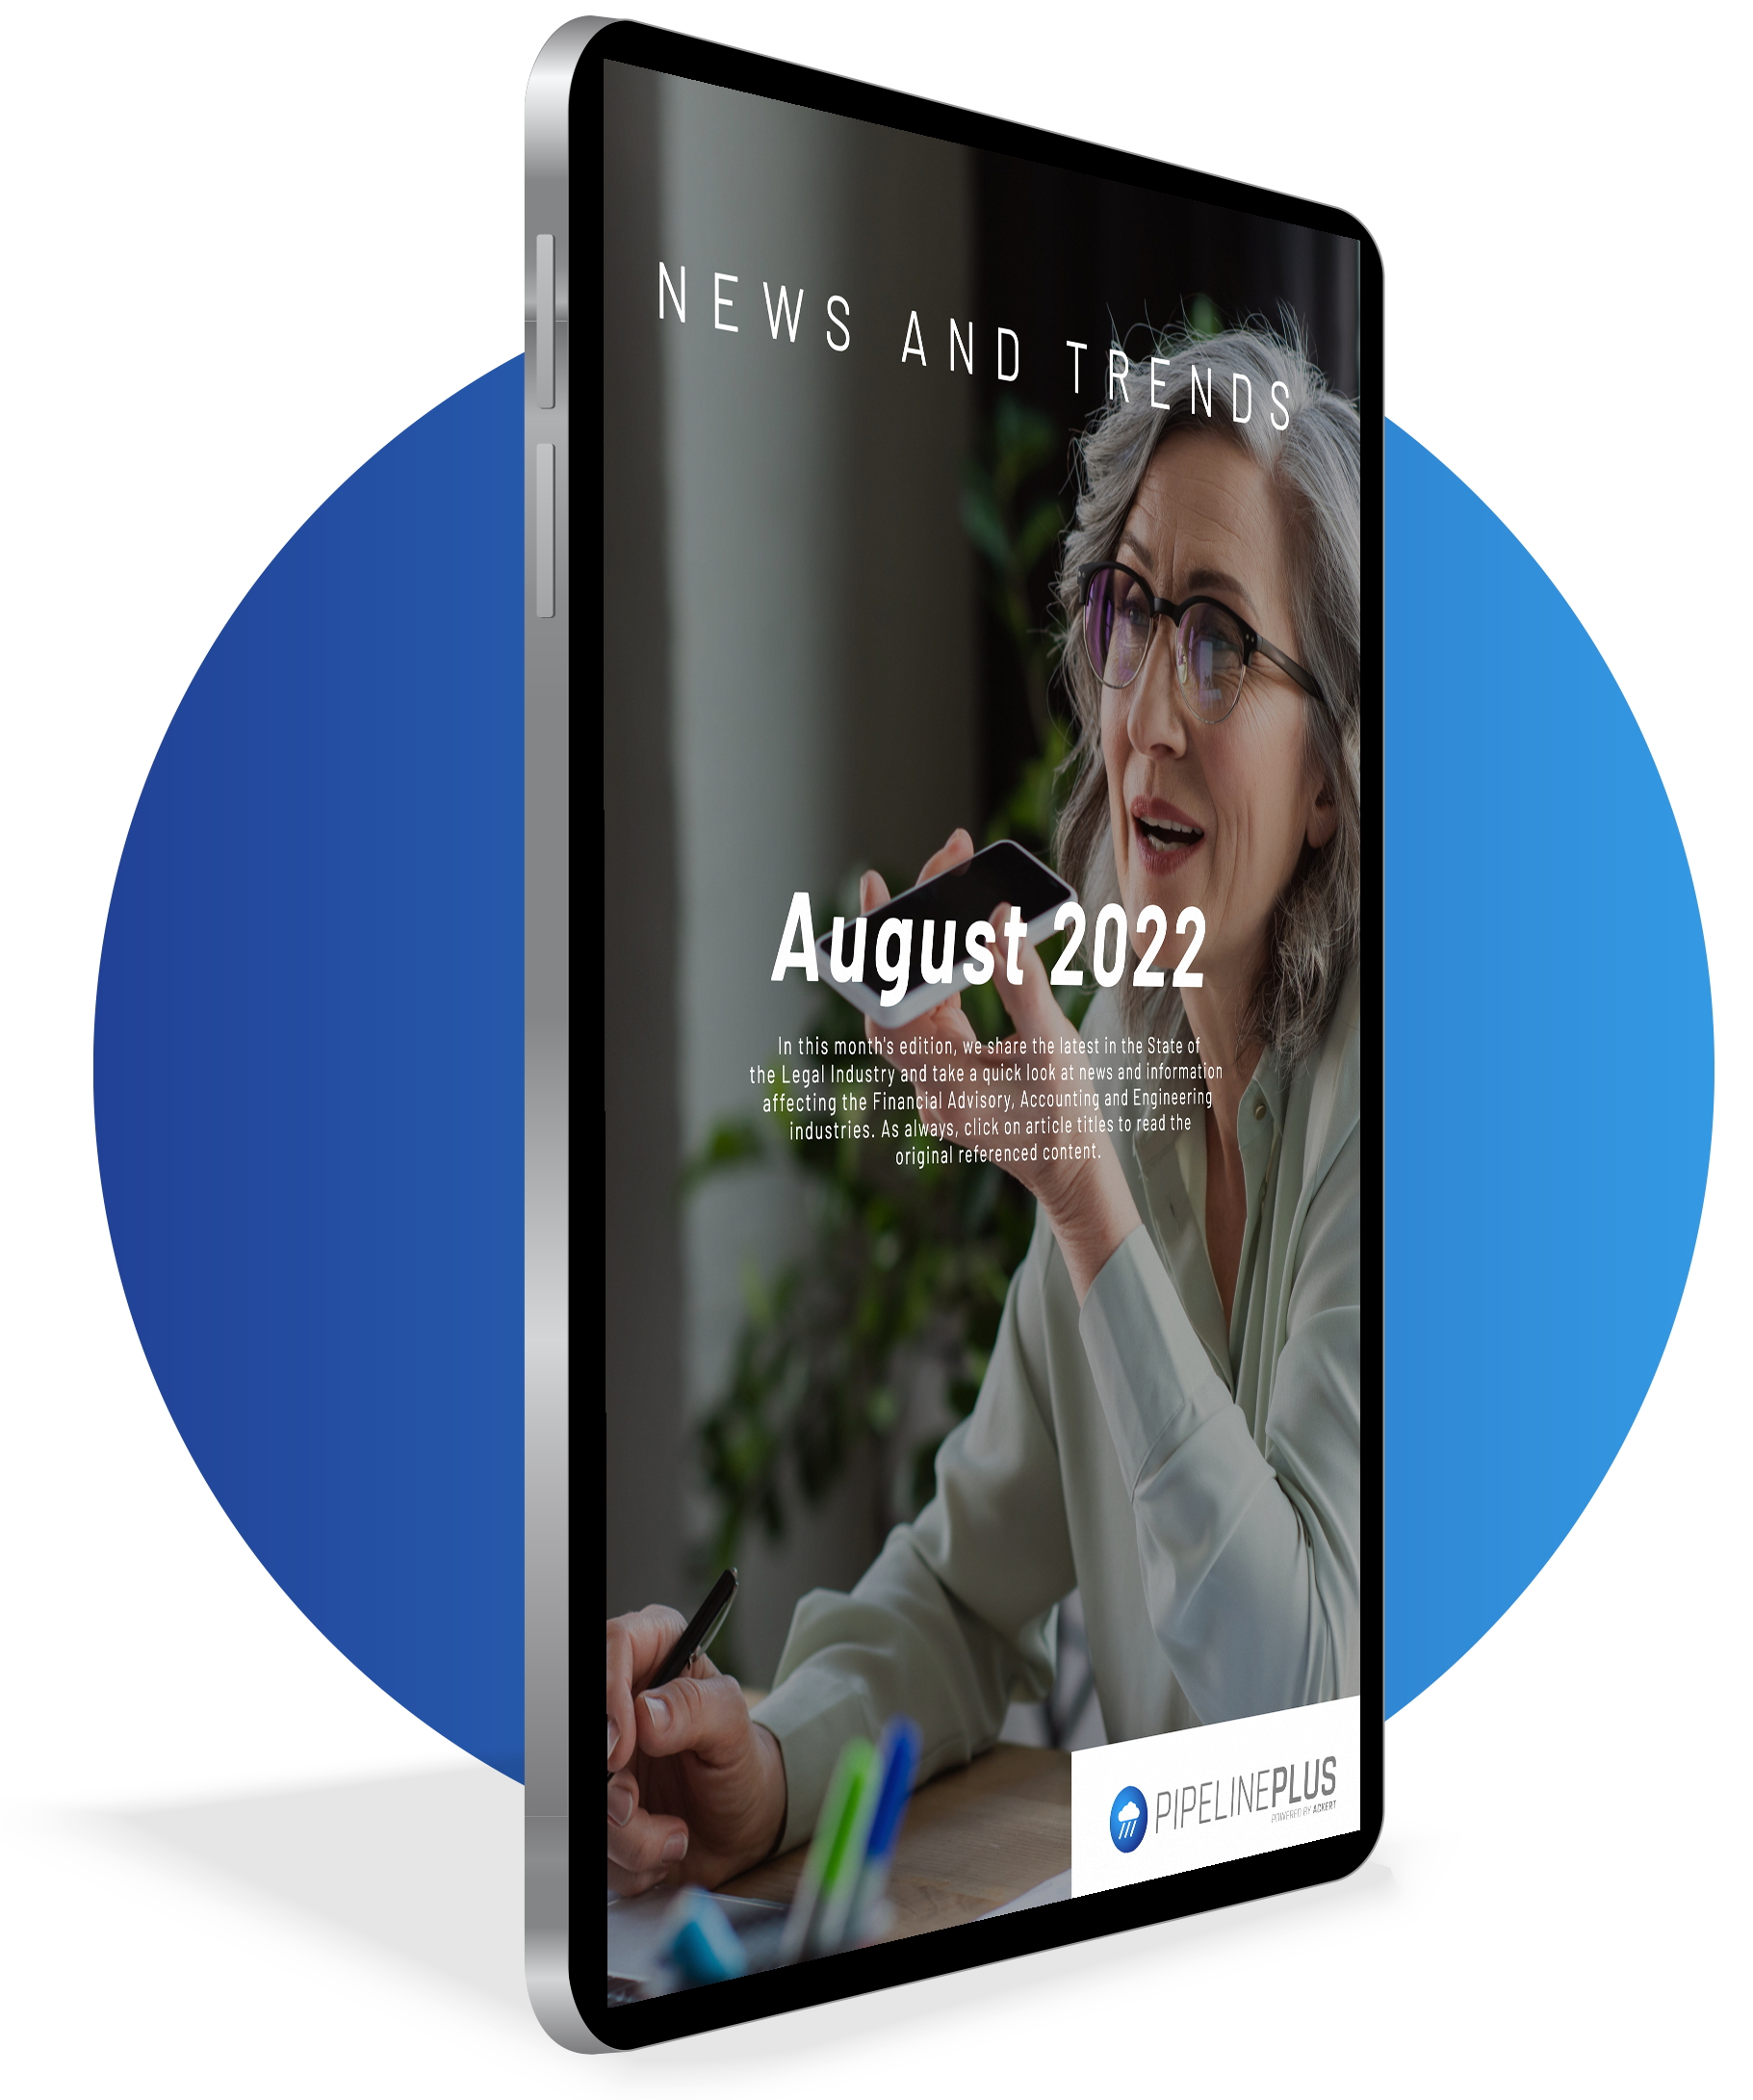 Free Newsletter Download | August 2022 News and Trends